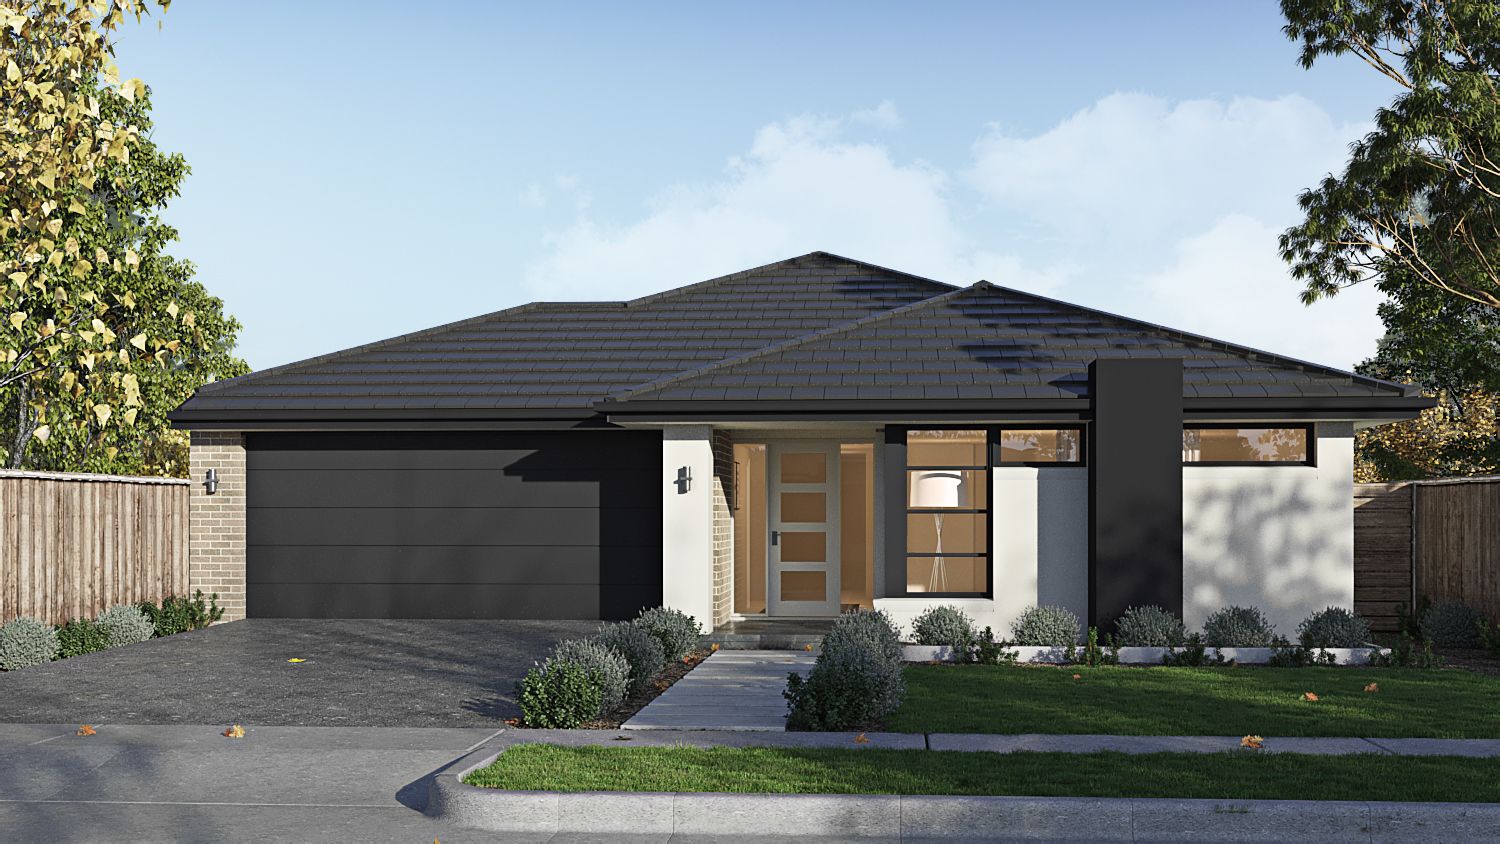 4 bedrooms New House & Land in 1517 Connor Avenue GAWLER EAST SA, 5118